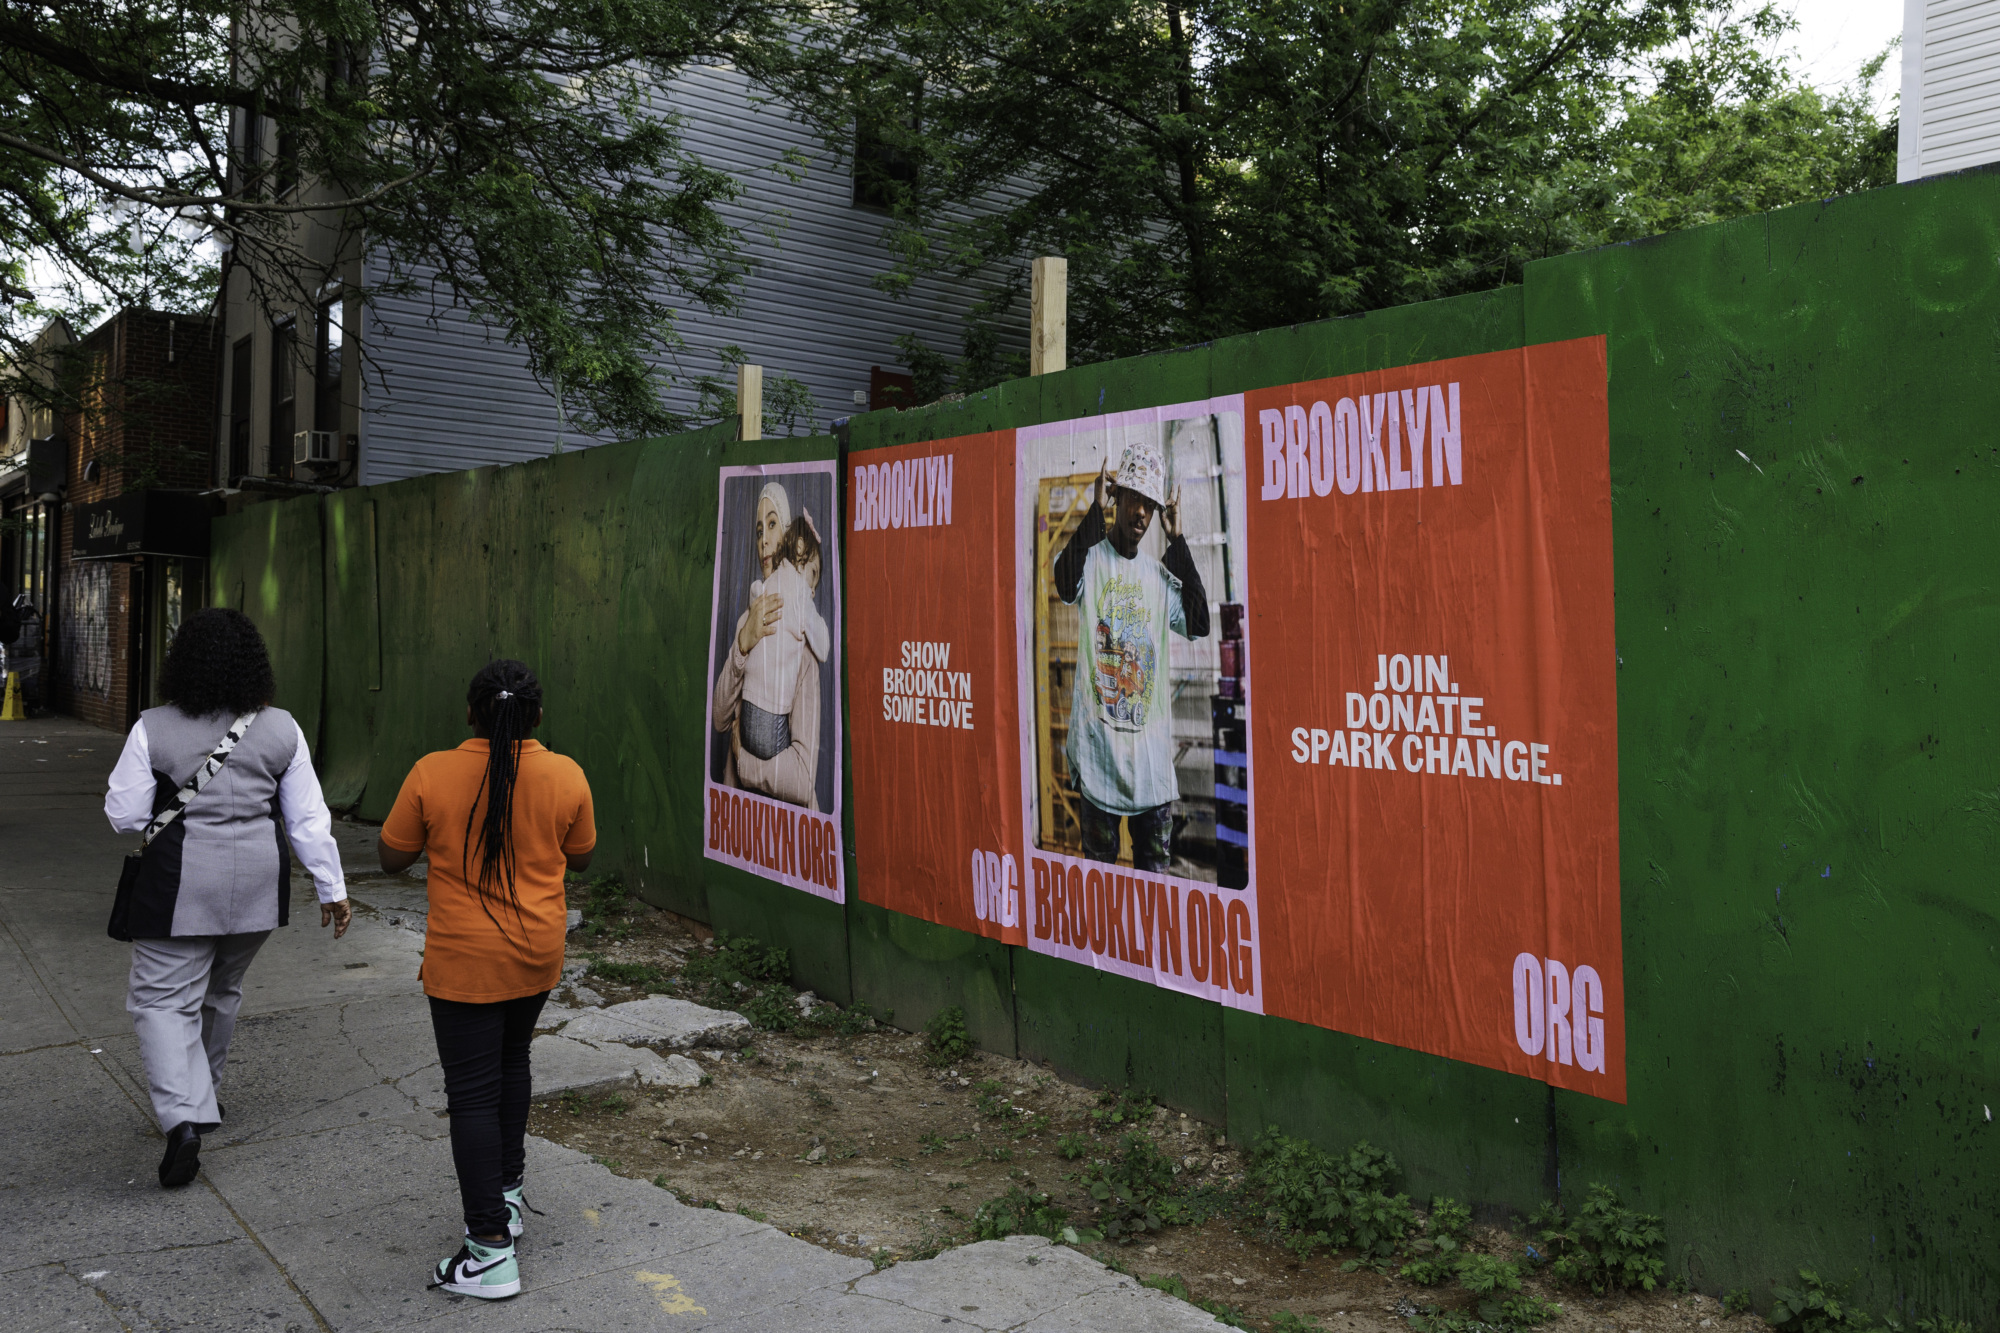 Two people walk past a green fence featuring three red posters that advertise a Brooklyn-based organization, encouraging donations and volunteer support.